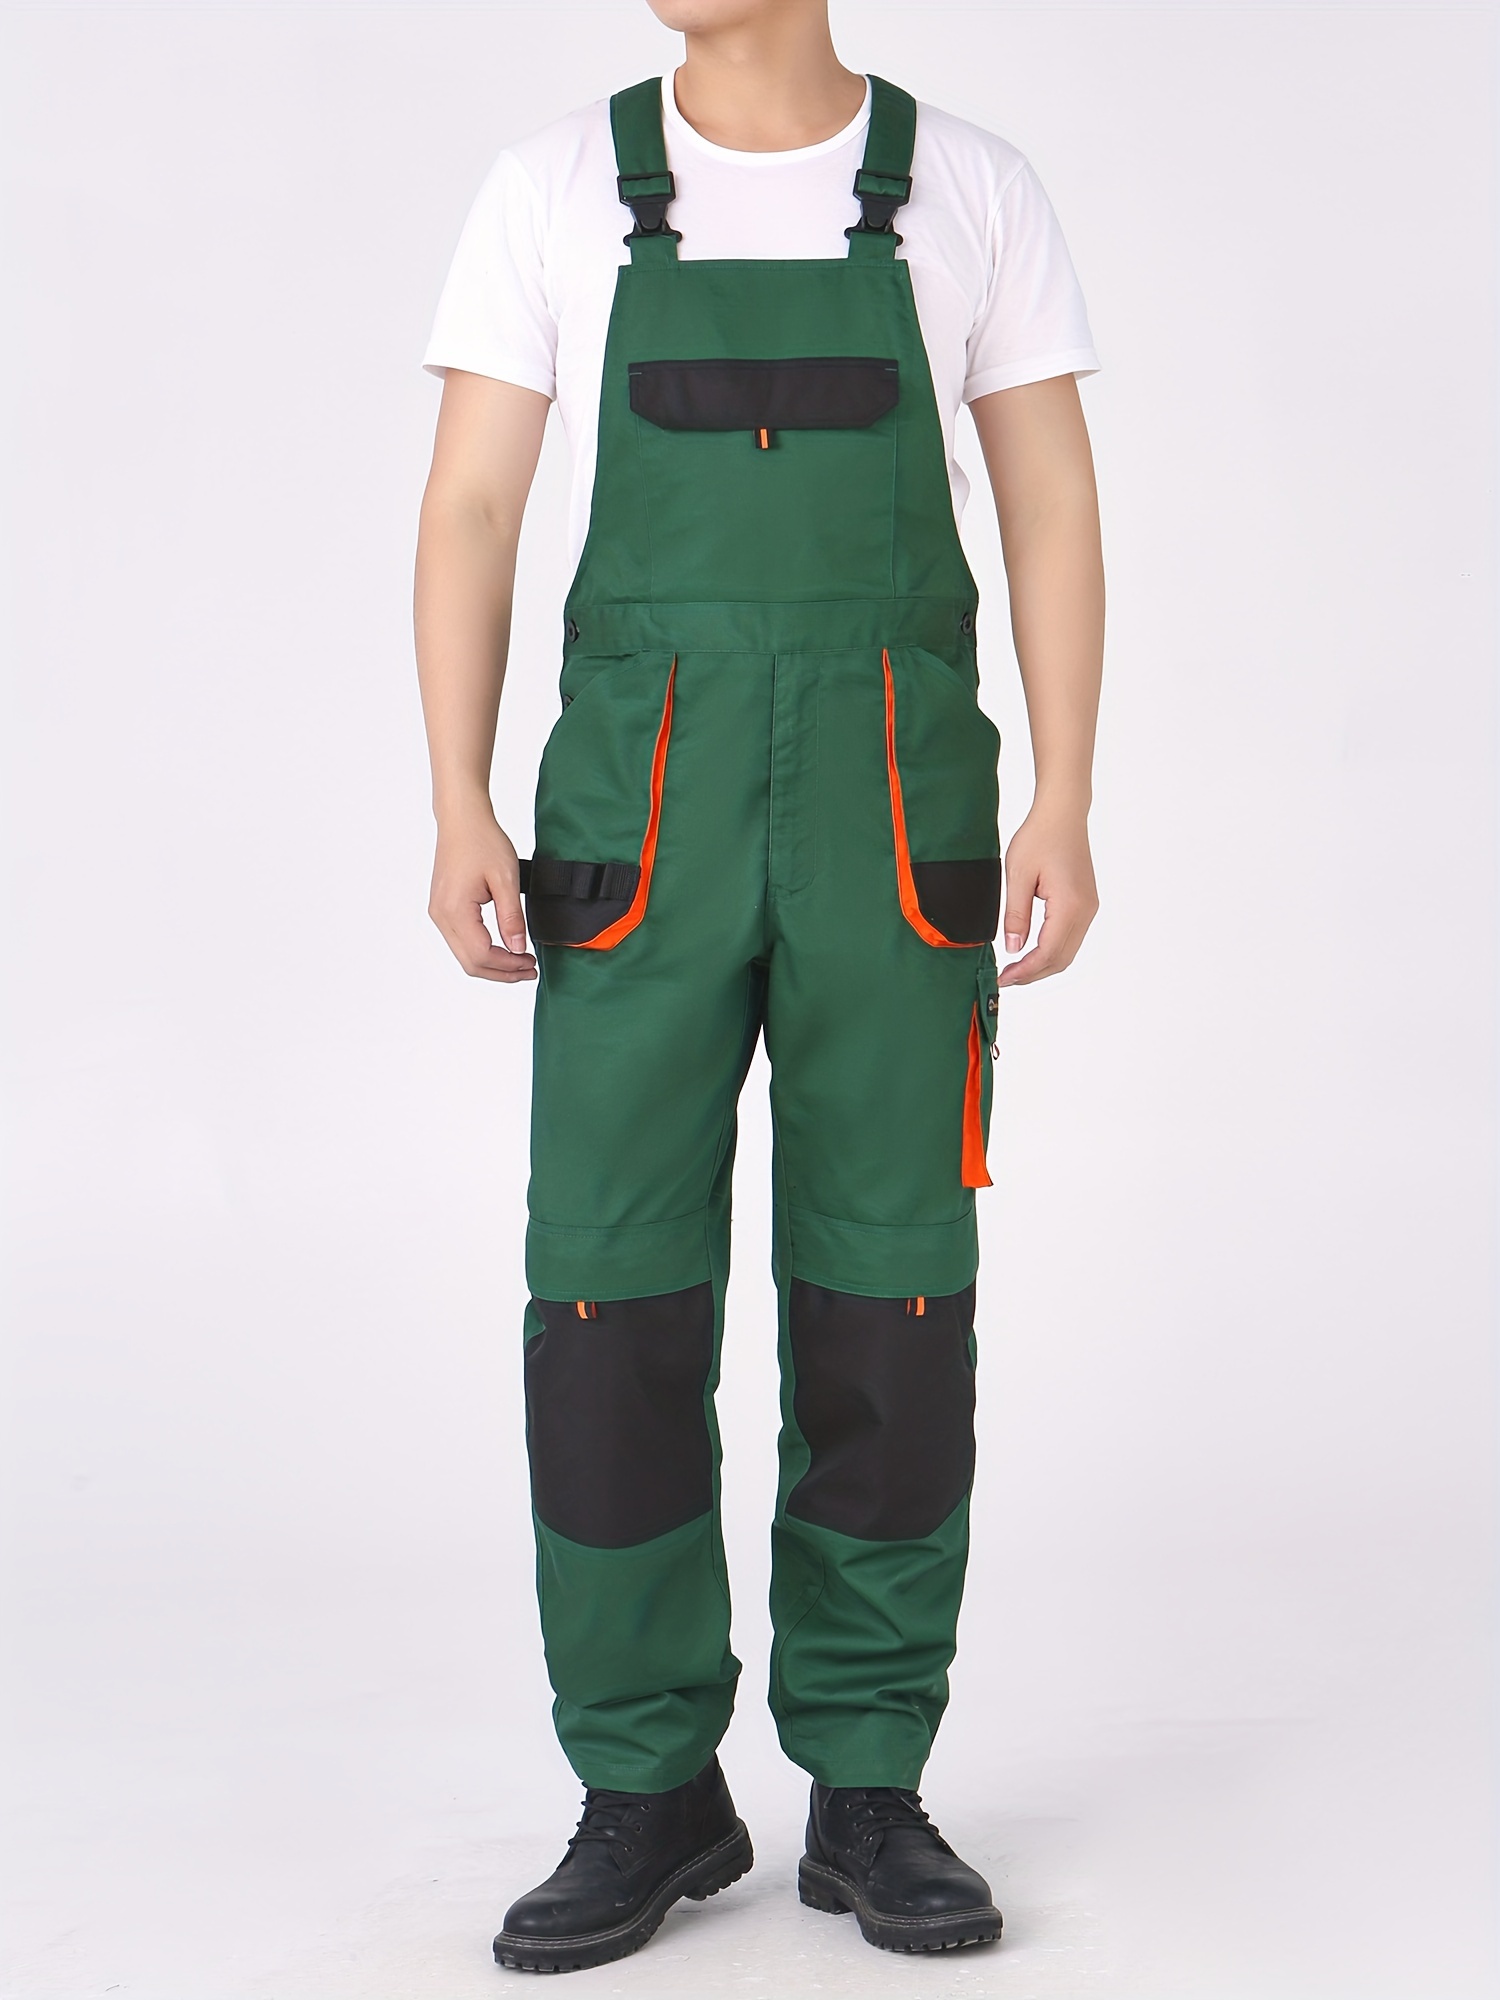 Mens Casual Short Sleeve Work Jumpsuit Pants One Piece Rompers Overalls  Trousers